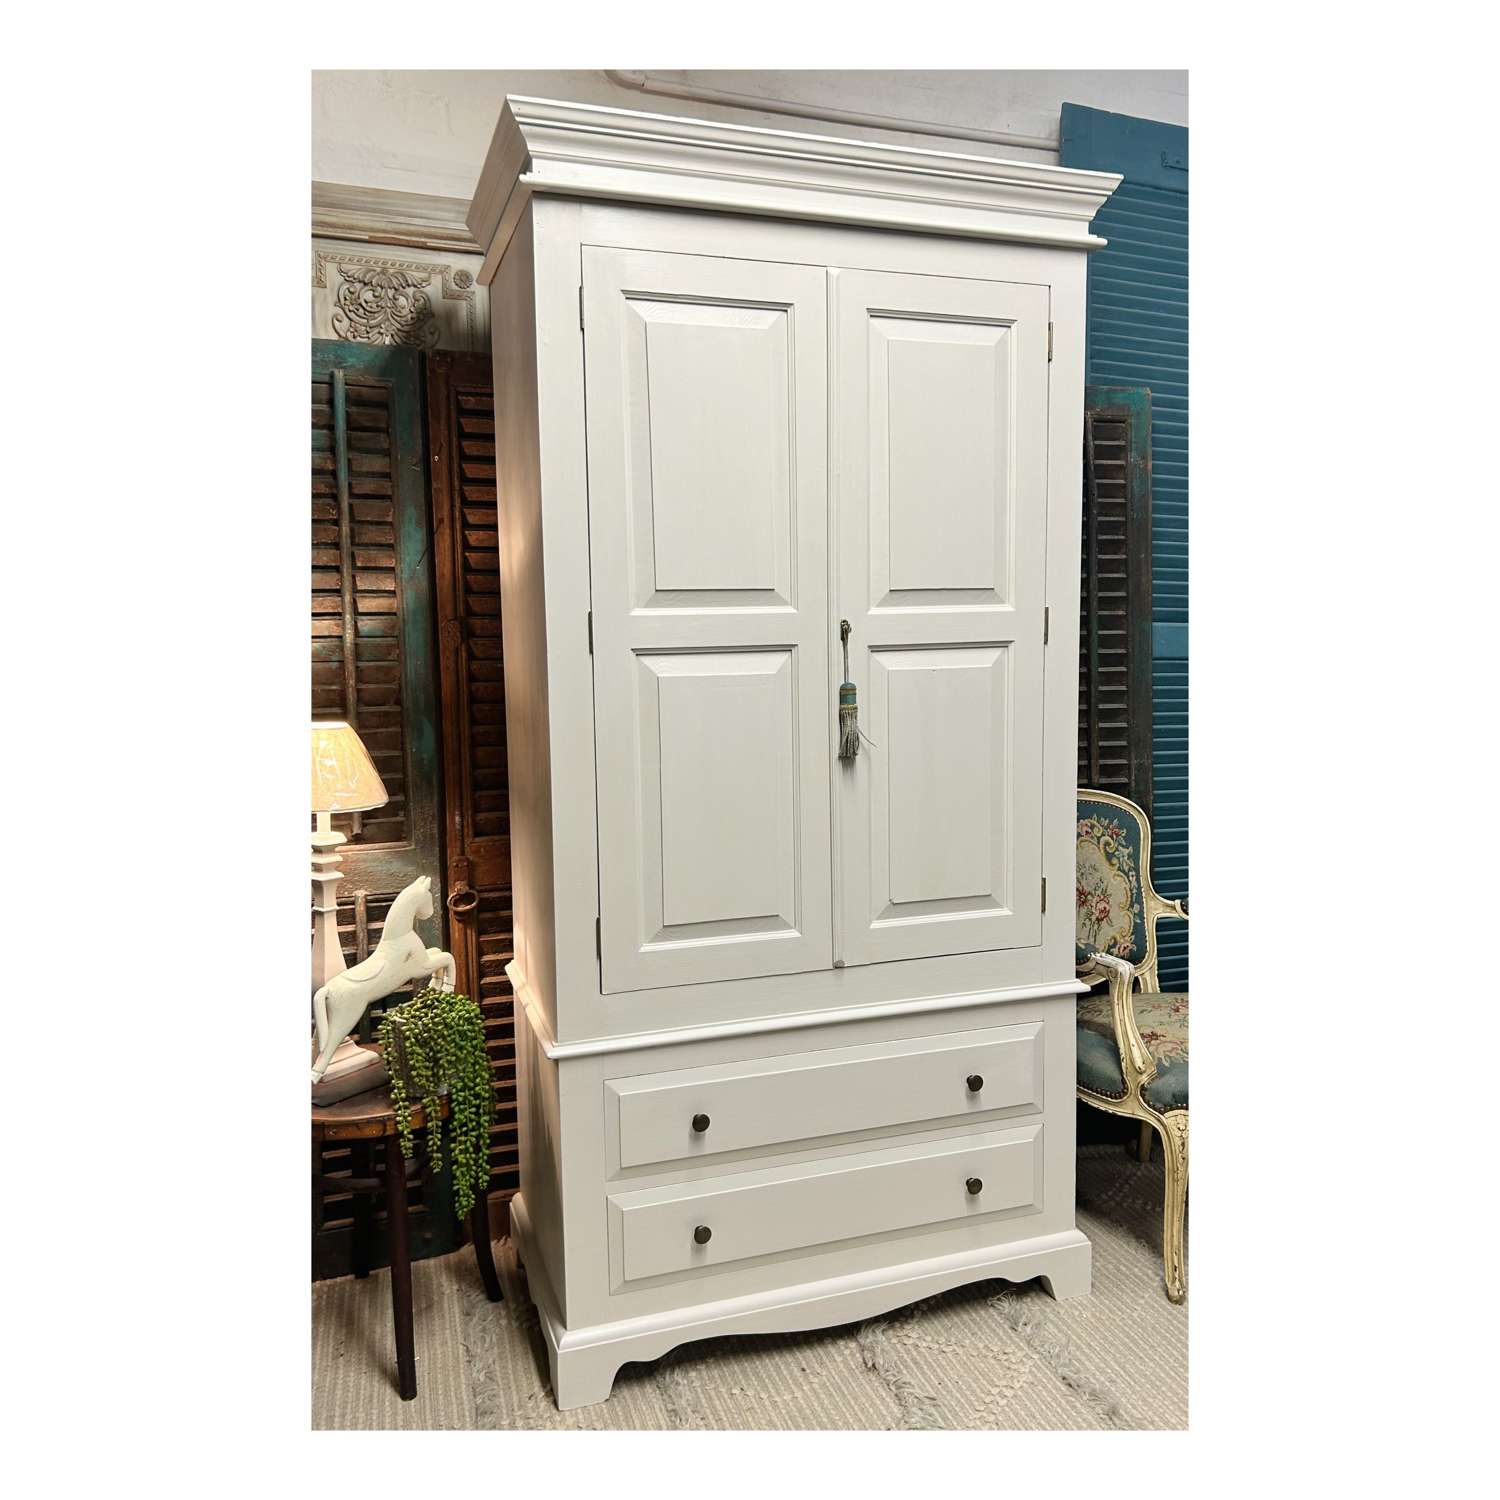 Painted Small Wardrobe With Drawers , Combination Wardrobe